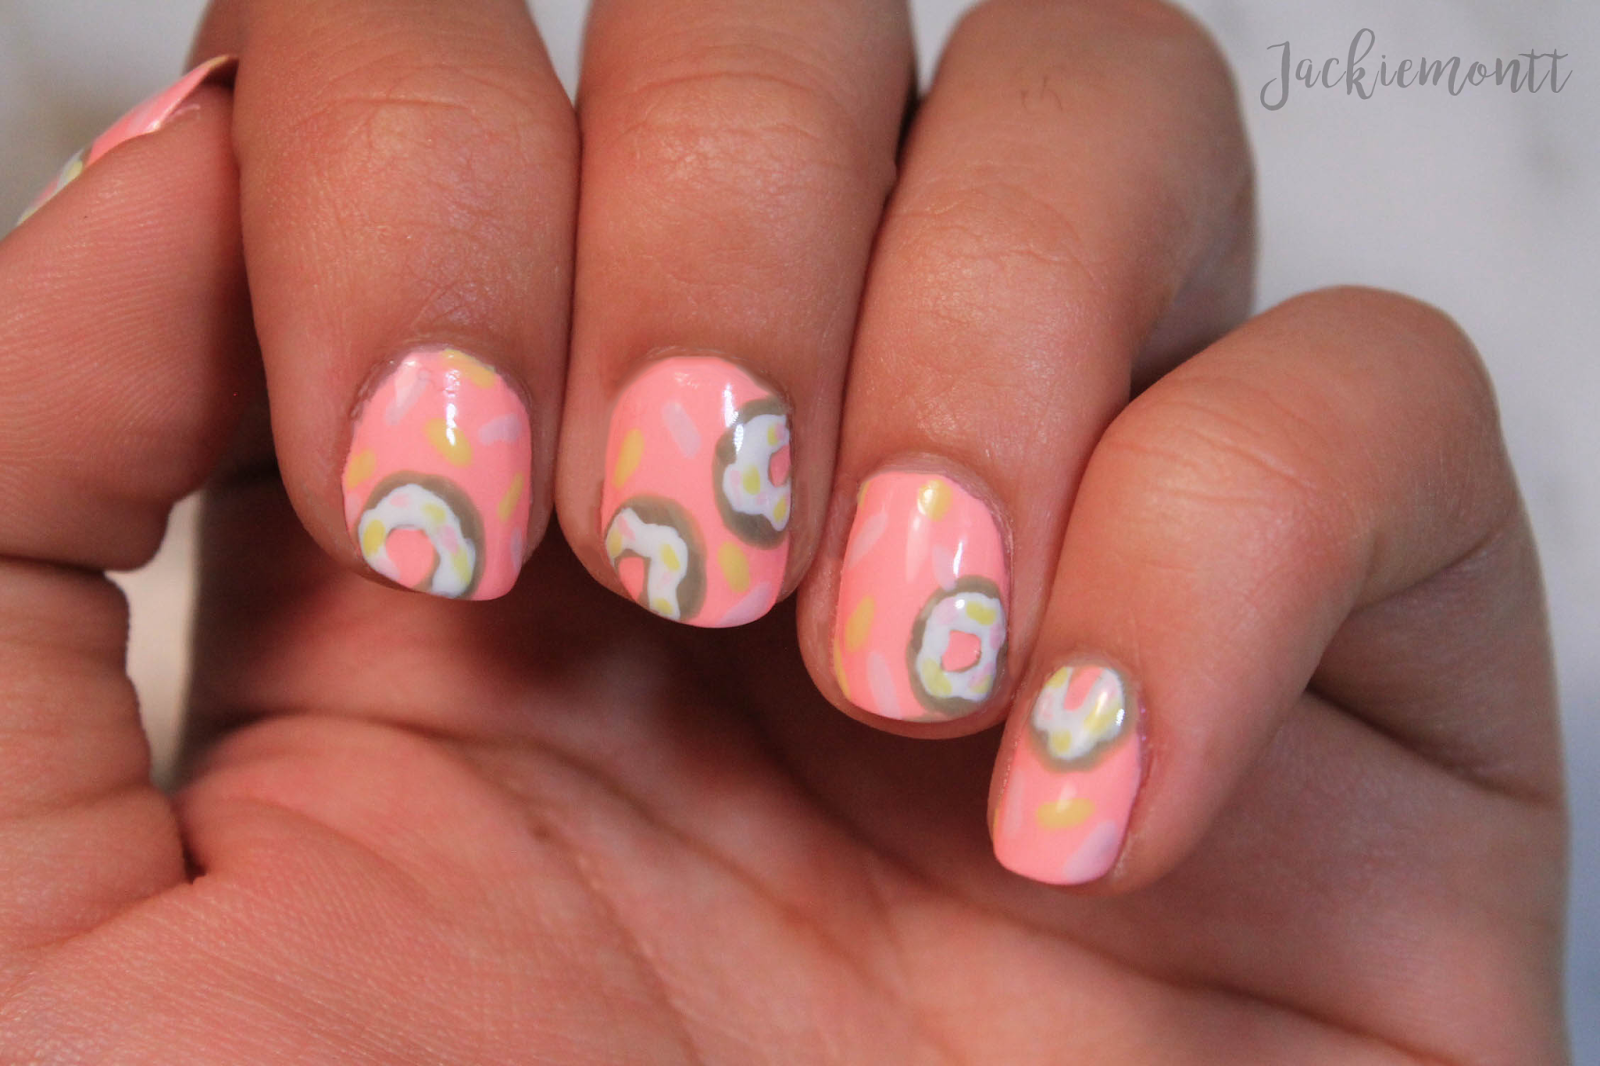 9. "Donut" Nail Design - wide 5